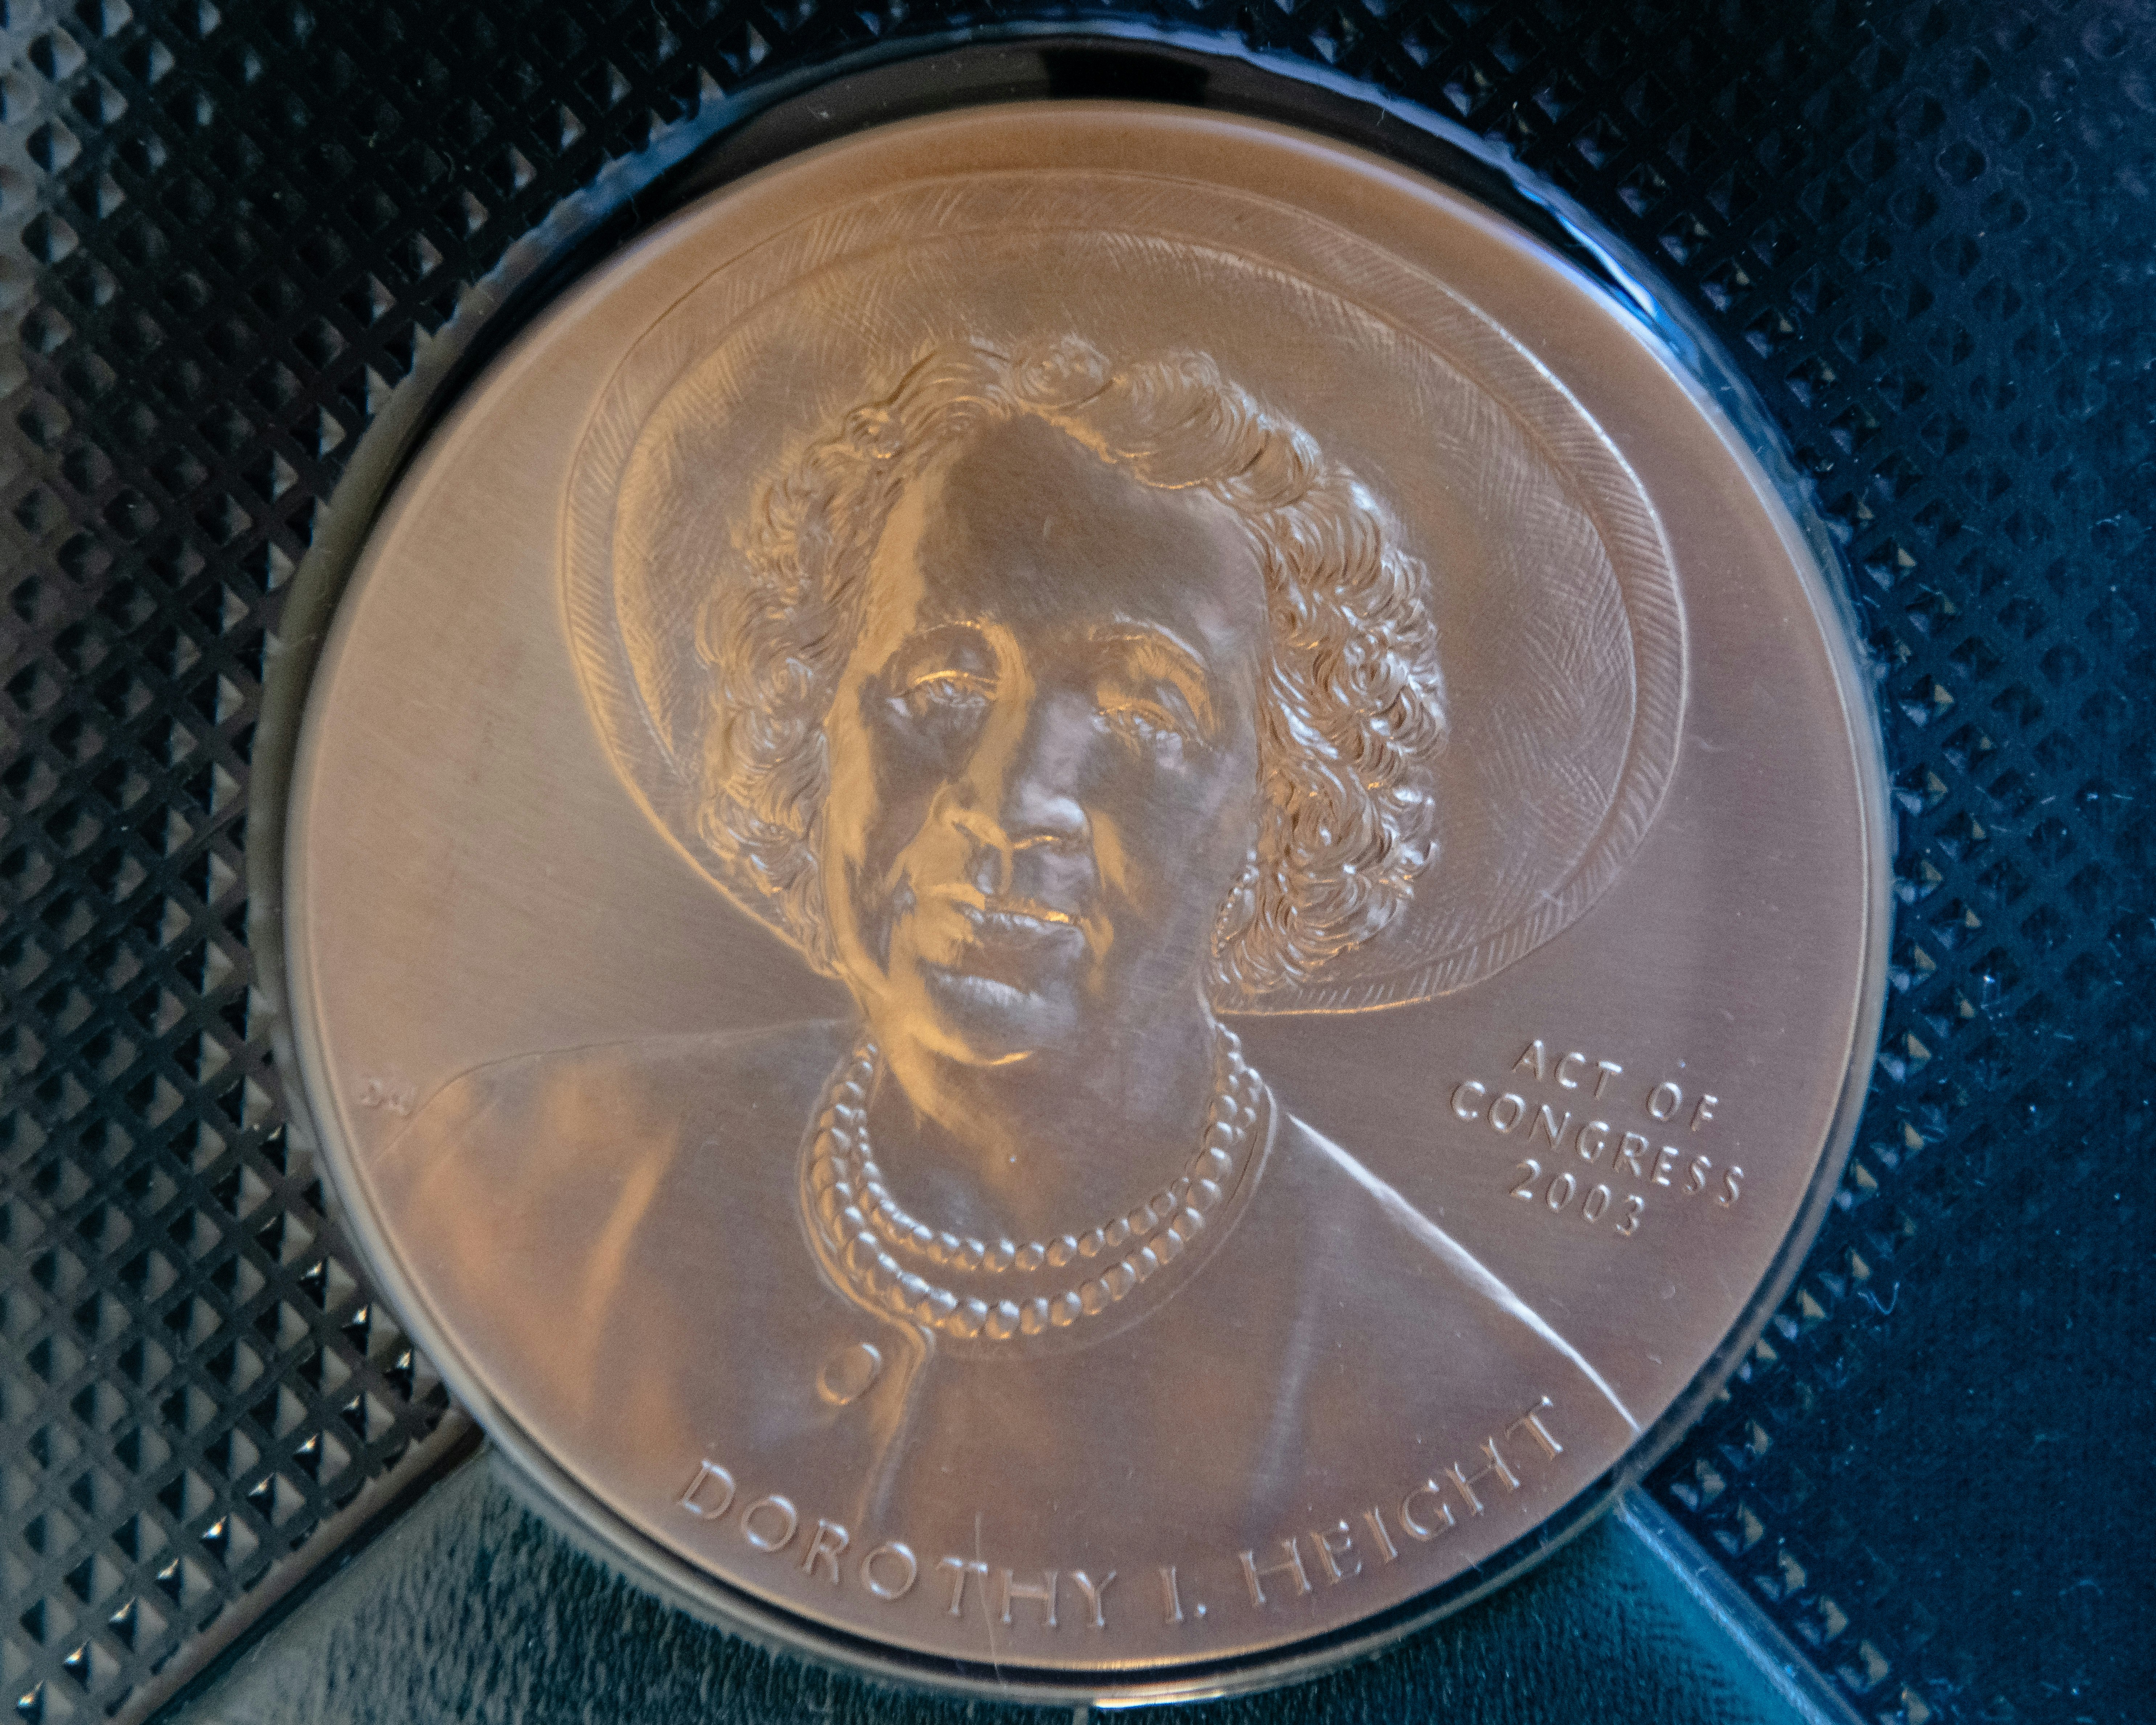 Dorothy Height's Medal of Freedom is a light copper and bears her embossed name and likeness, along with the words "Act of Congress, 2003."